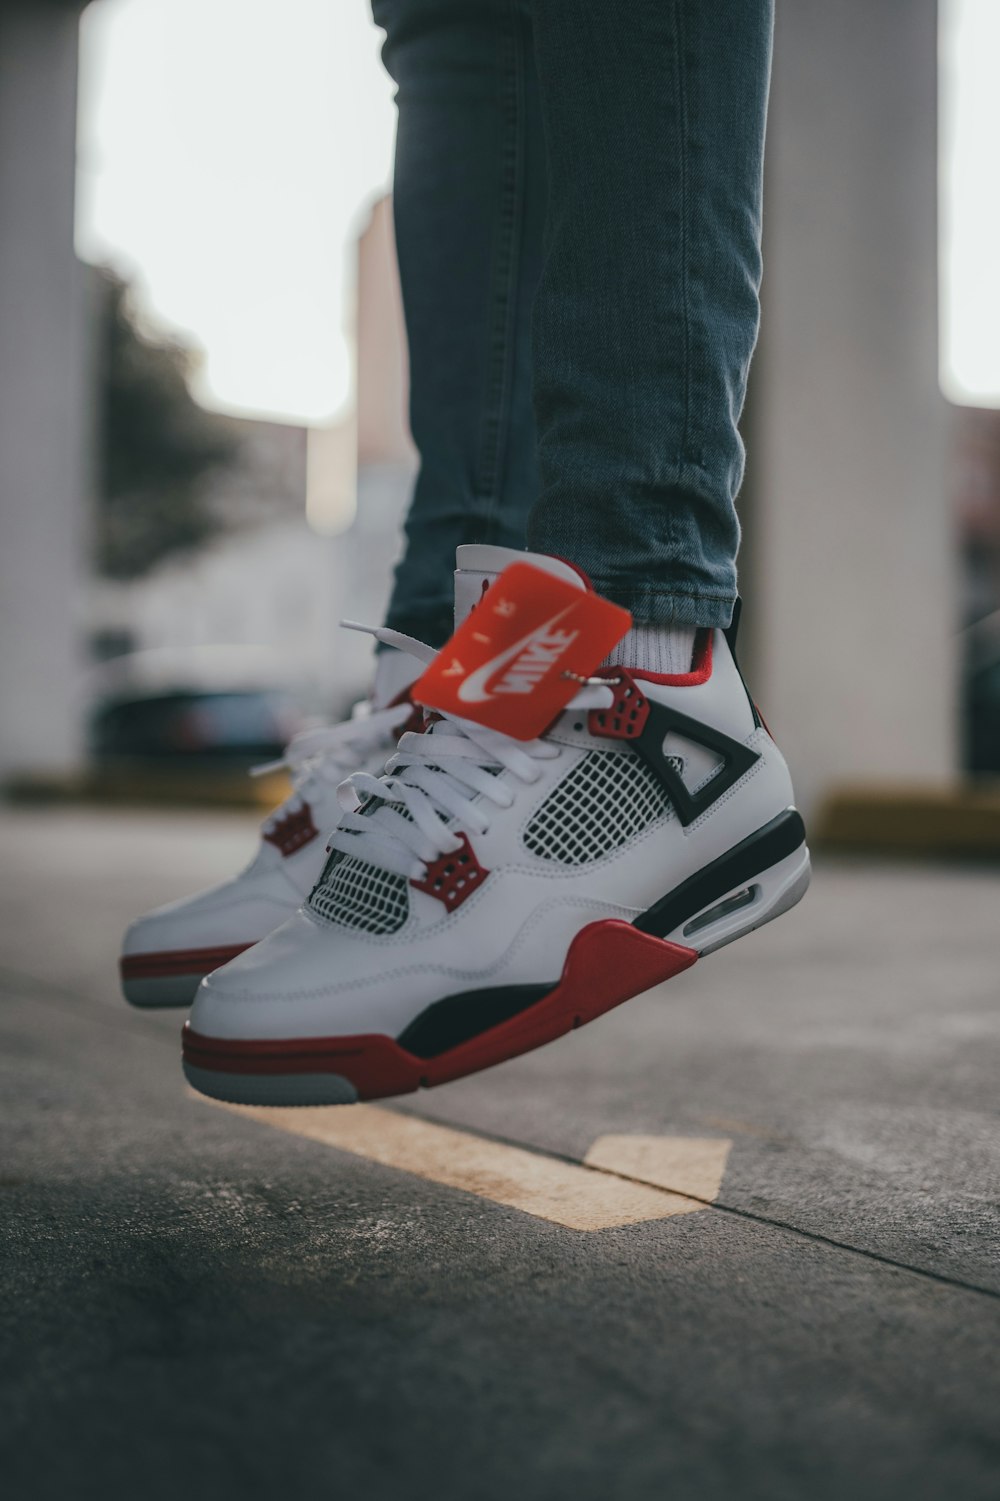 person in blue denim jeans wearing red and white nike air max 90 photo –  Free Footwear Image on Unsplash